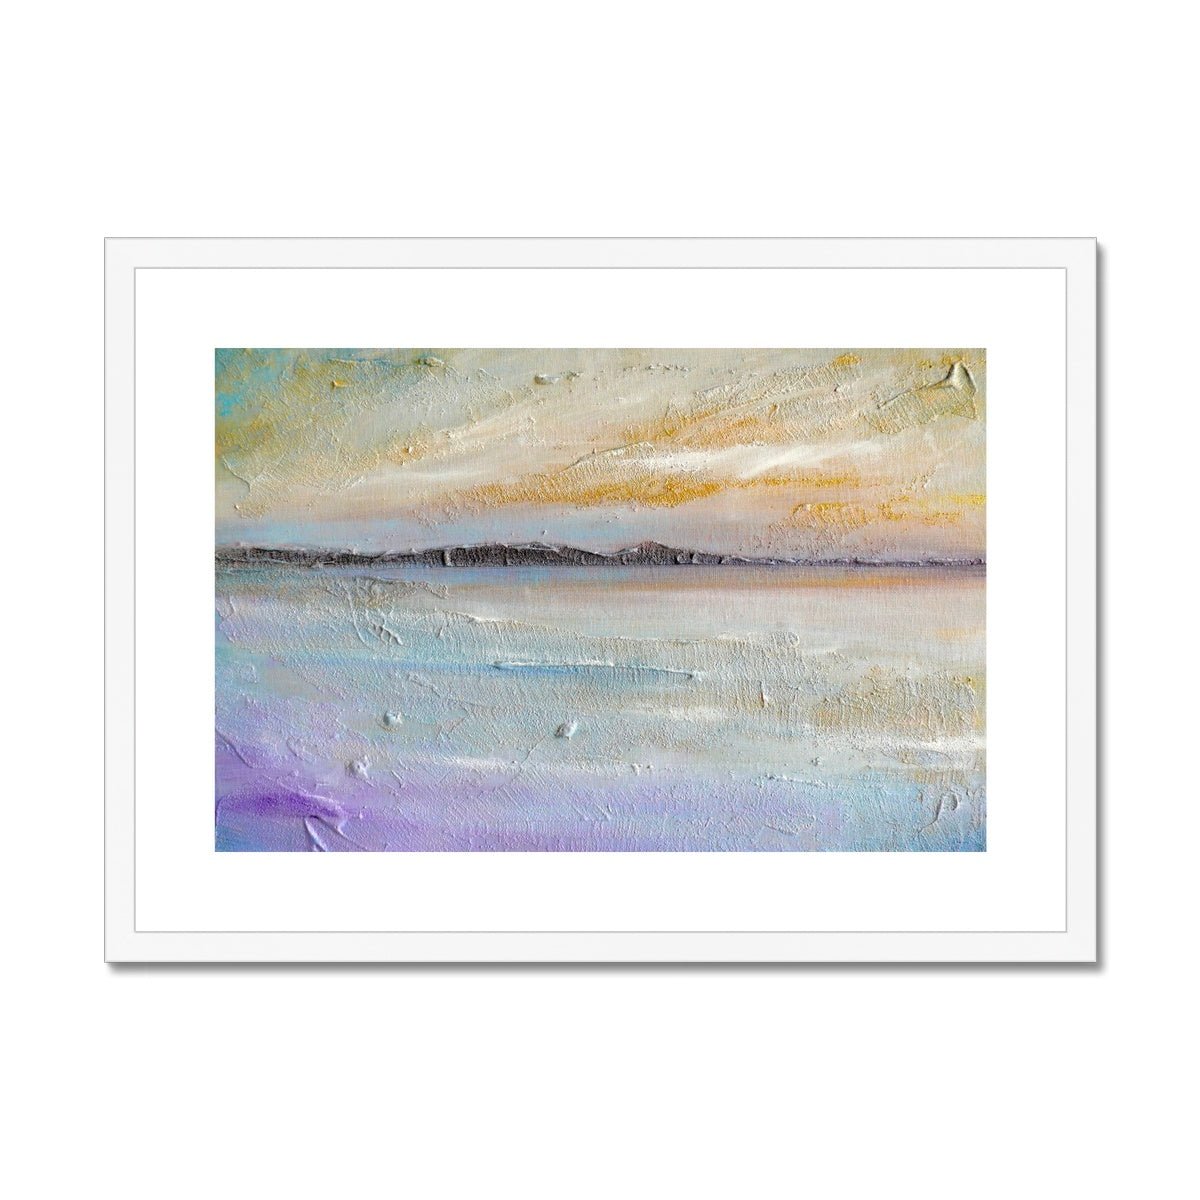 Sollas Beach North Uist Painting | Framed & Mounted Prints From Scotland-Framed & Mounted Prints-Hebridean Islands Art Gallery-A2 Landscape-White Frame-Paintings, Prints, Homeware, Art Gifts From Scotland By Scottish Artist Kevin Hunter